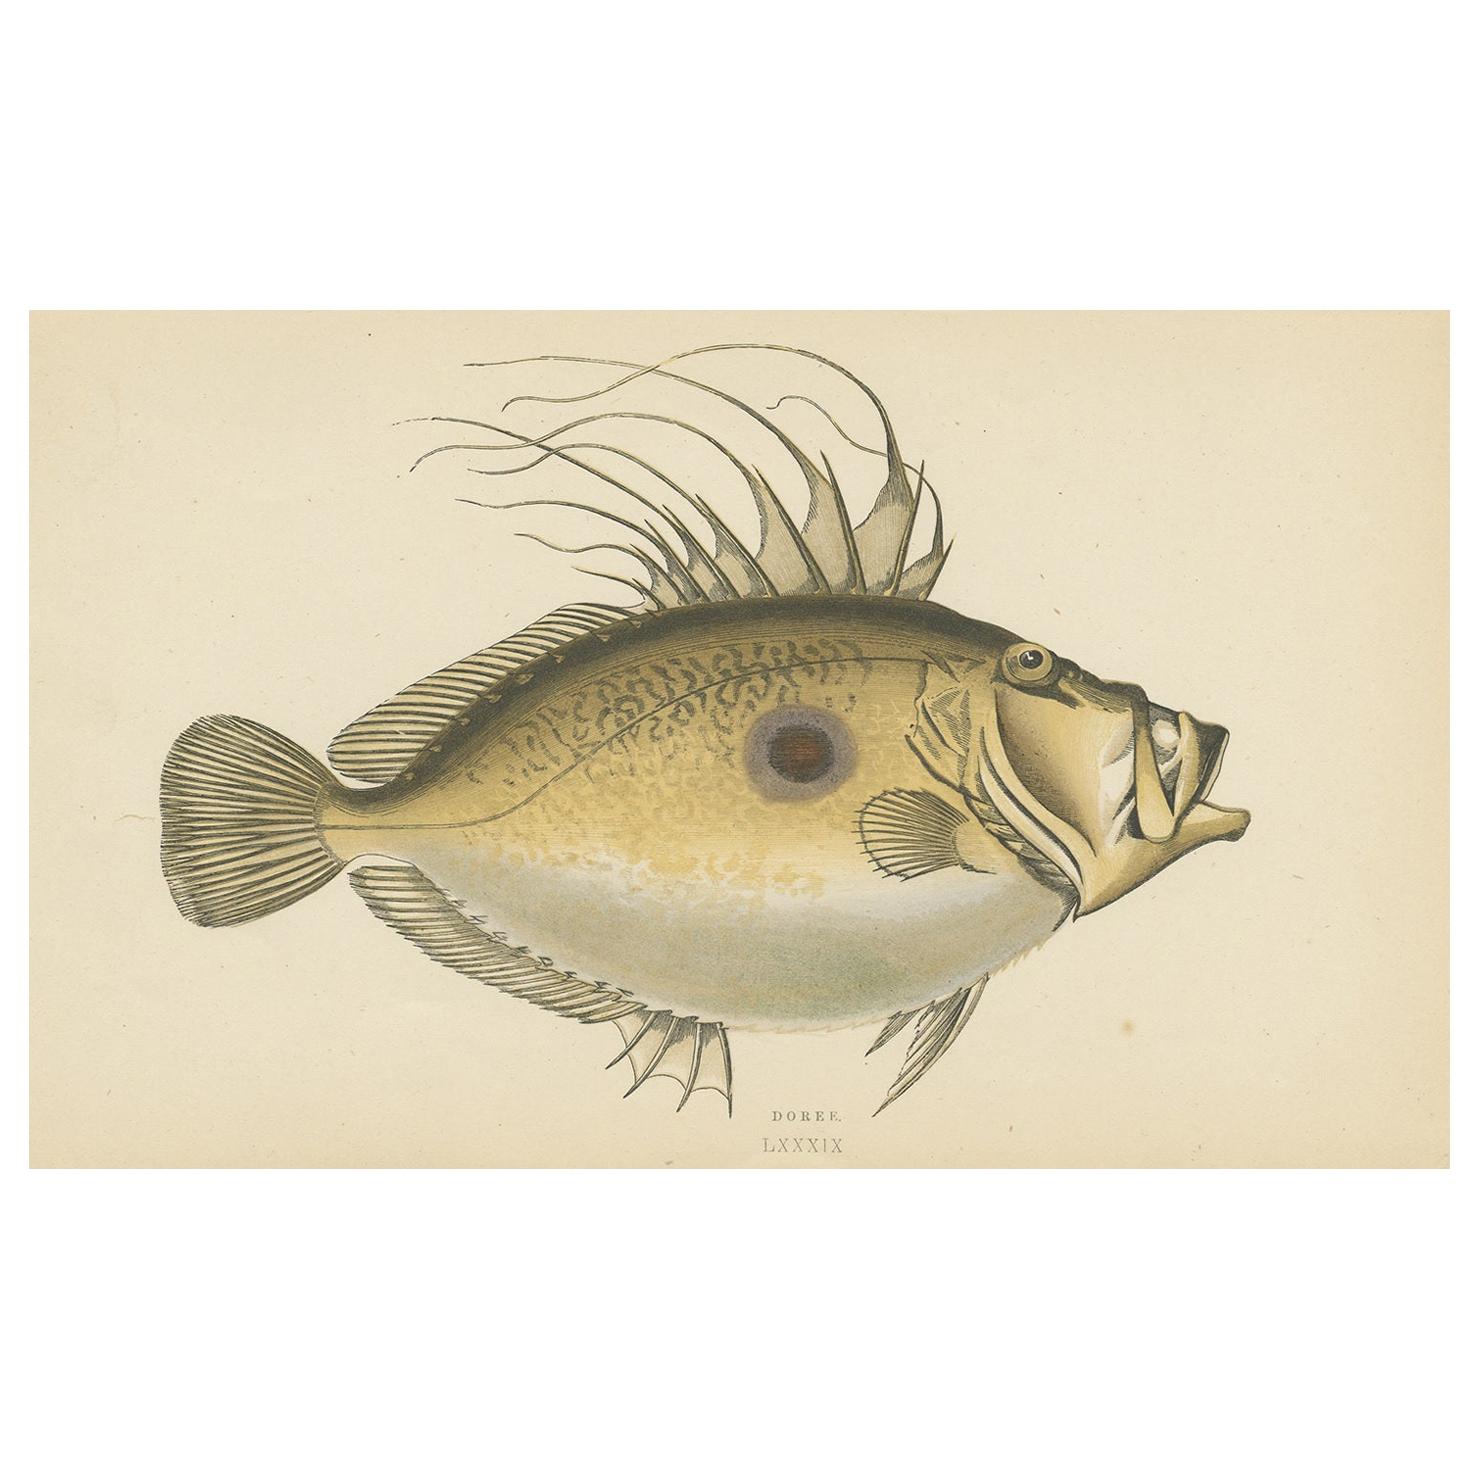 The Antique Print of the Dory Fish by J. Couch, circa 1870